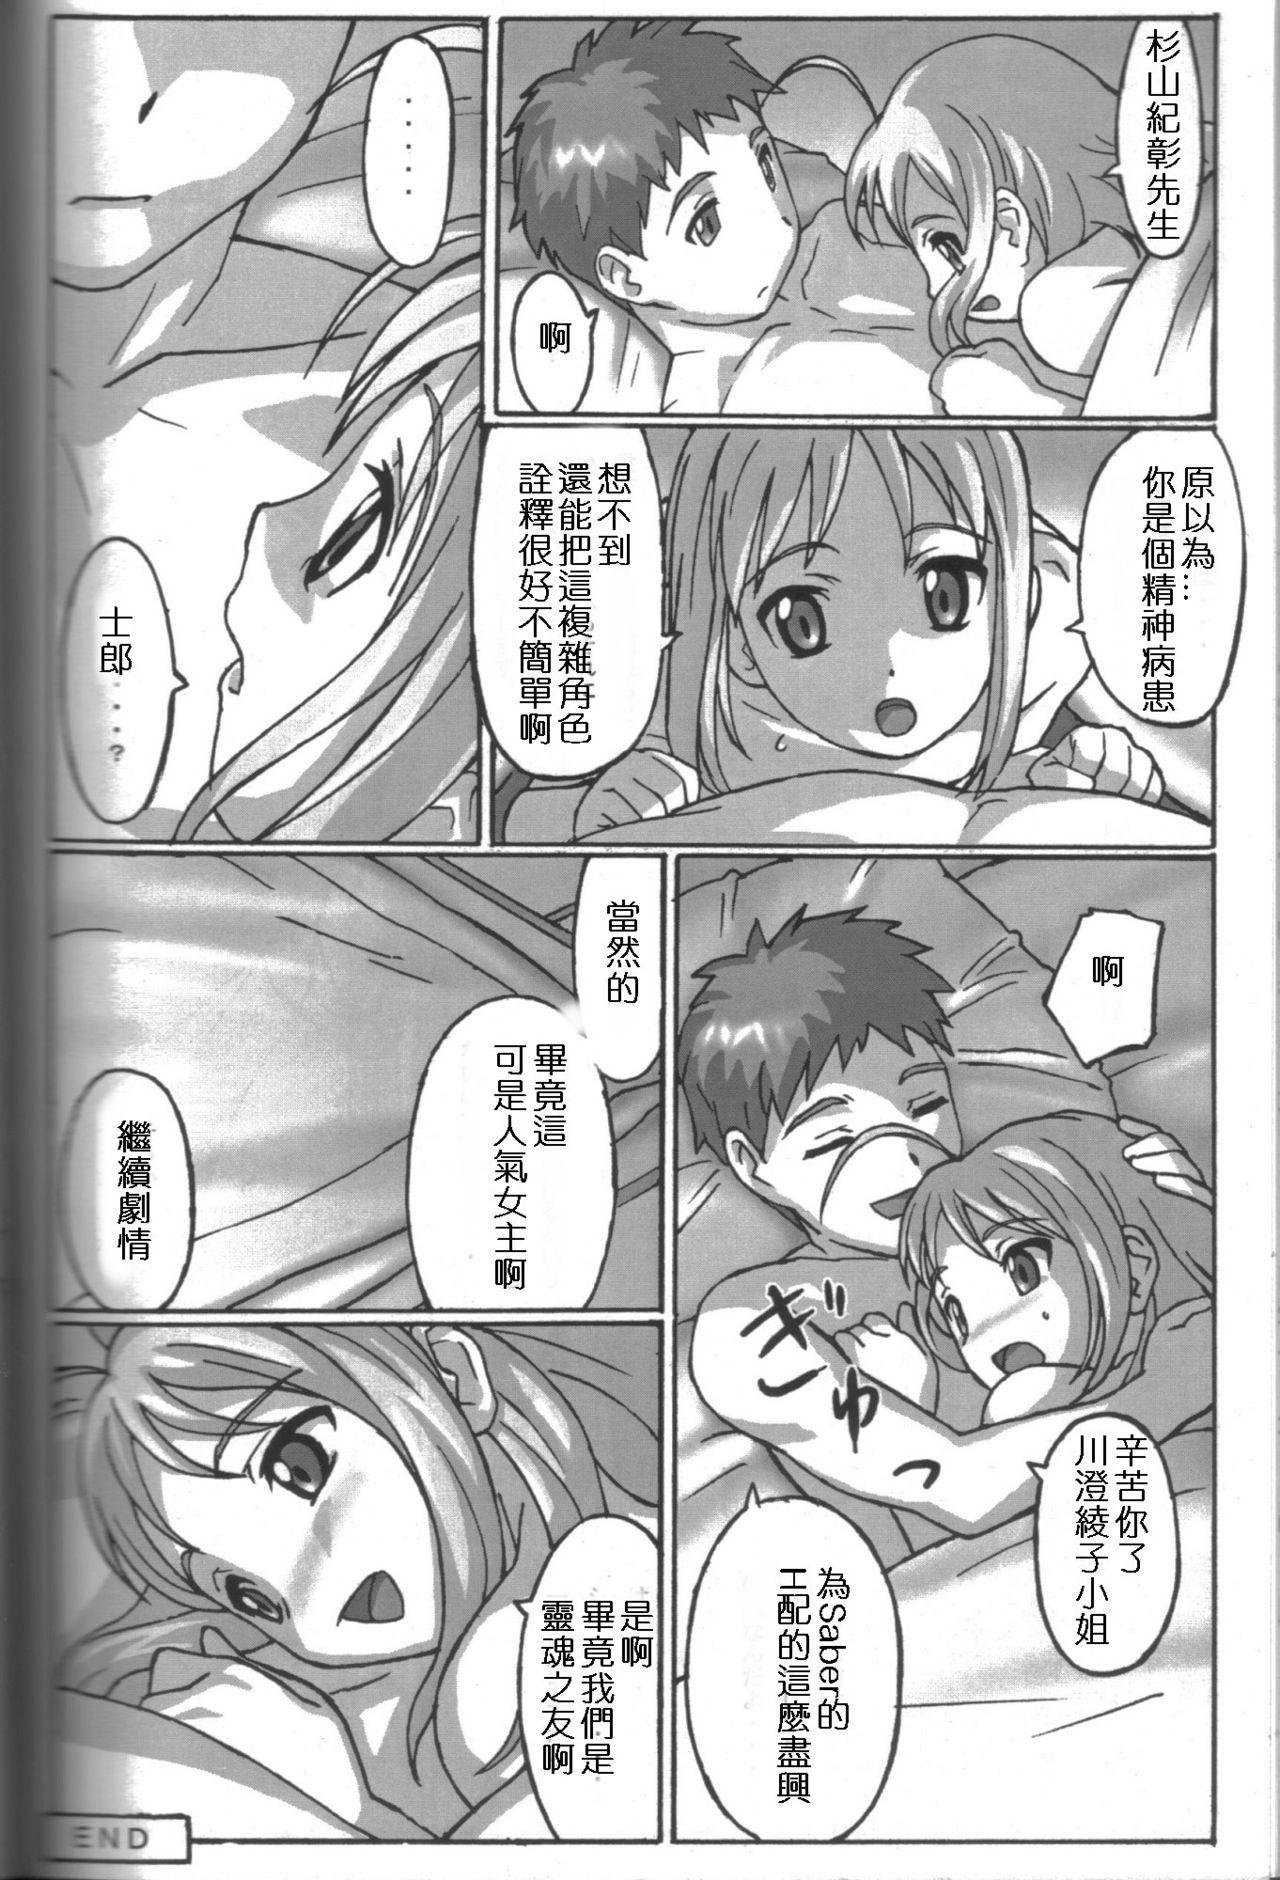 Lez Hardcore A PIECE OF CAKE - Fate stay night Strap On - Page 34